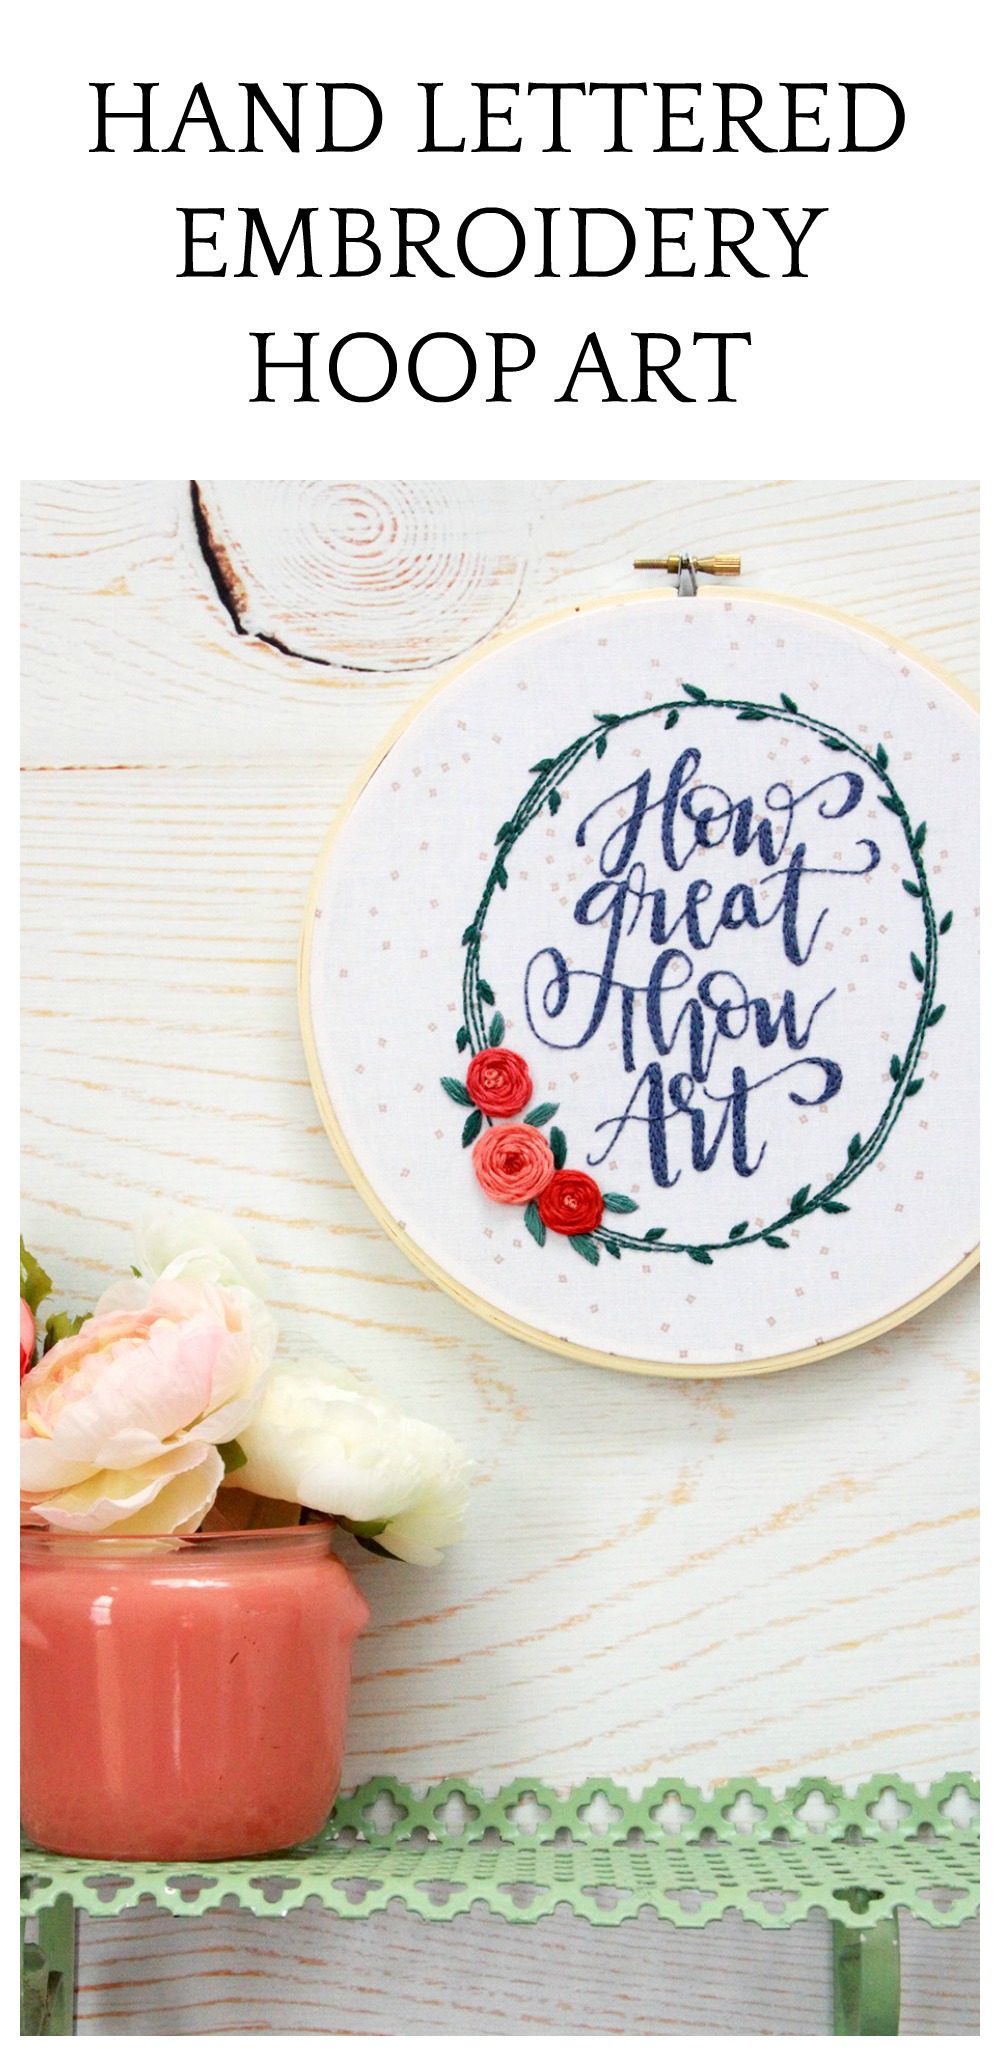 Hand Lettered Embroidery Hoop Art